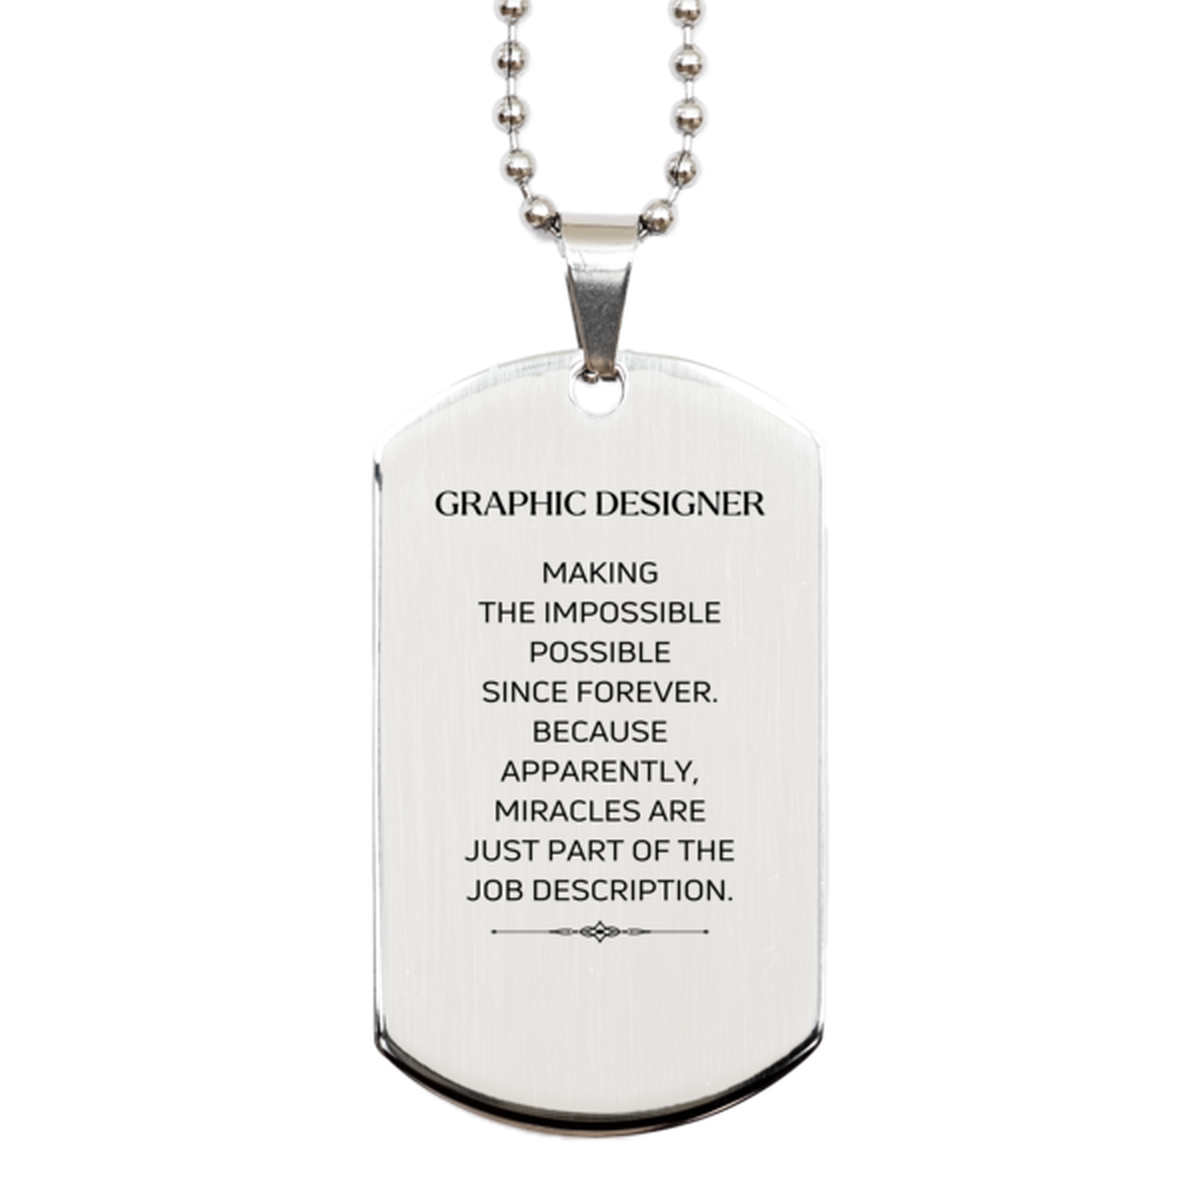 Funny Graphic Designer Gifts, Miracles are just part of the job description, Inspirational Birthday Silver Dog Tag For Graphic Designer, Men, Women, Coworkers, Friends, Boss